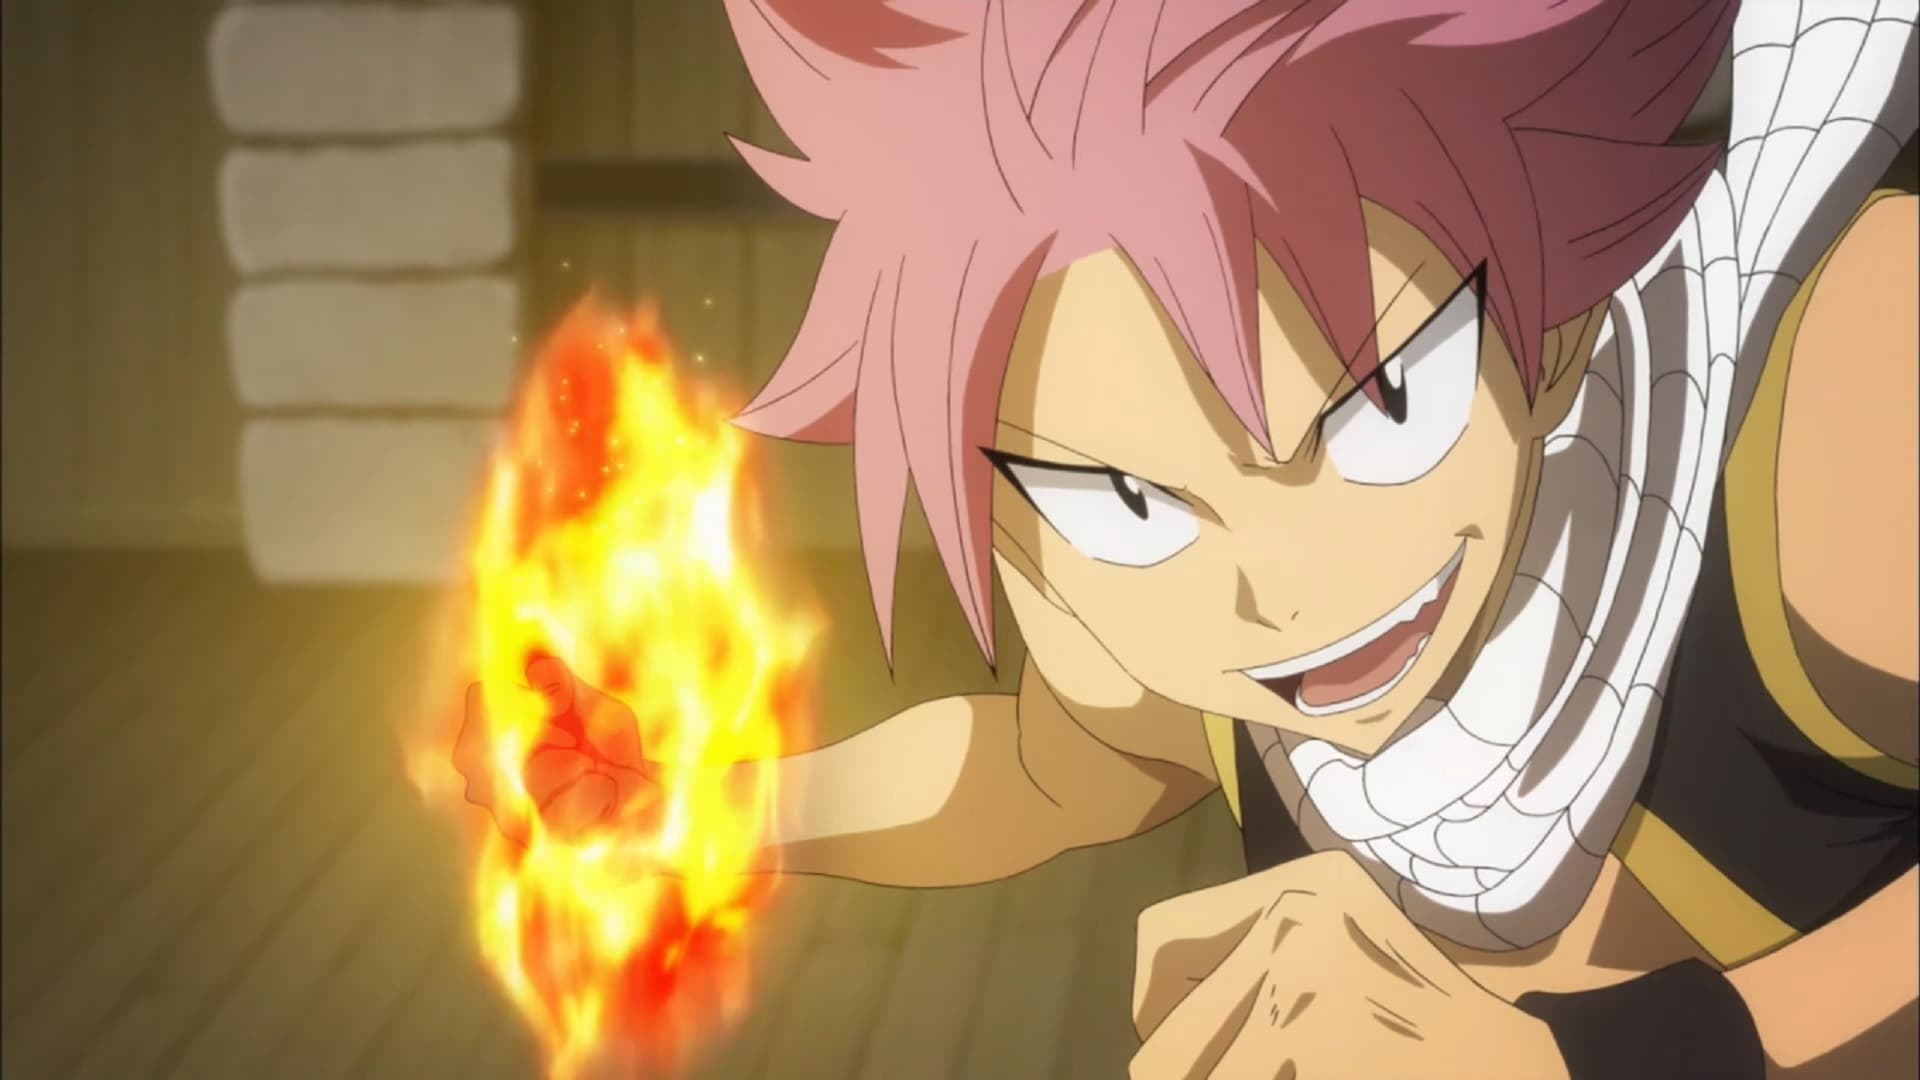 christopher daniel recommends Fairy Tail Episode 1